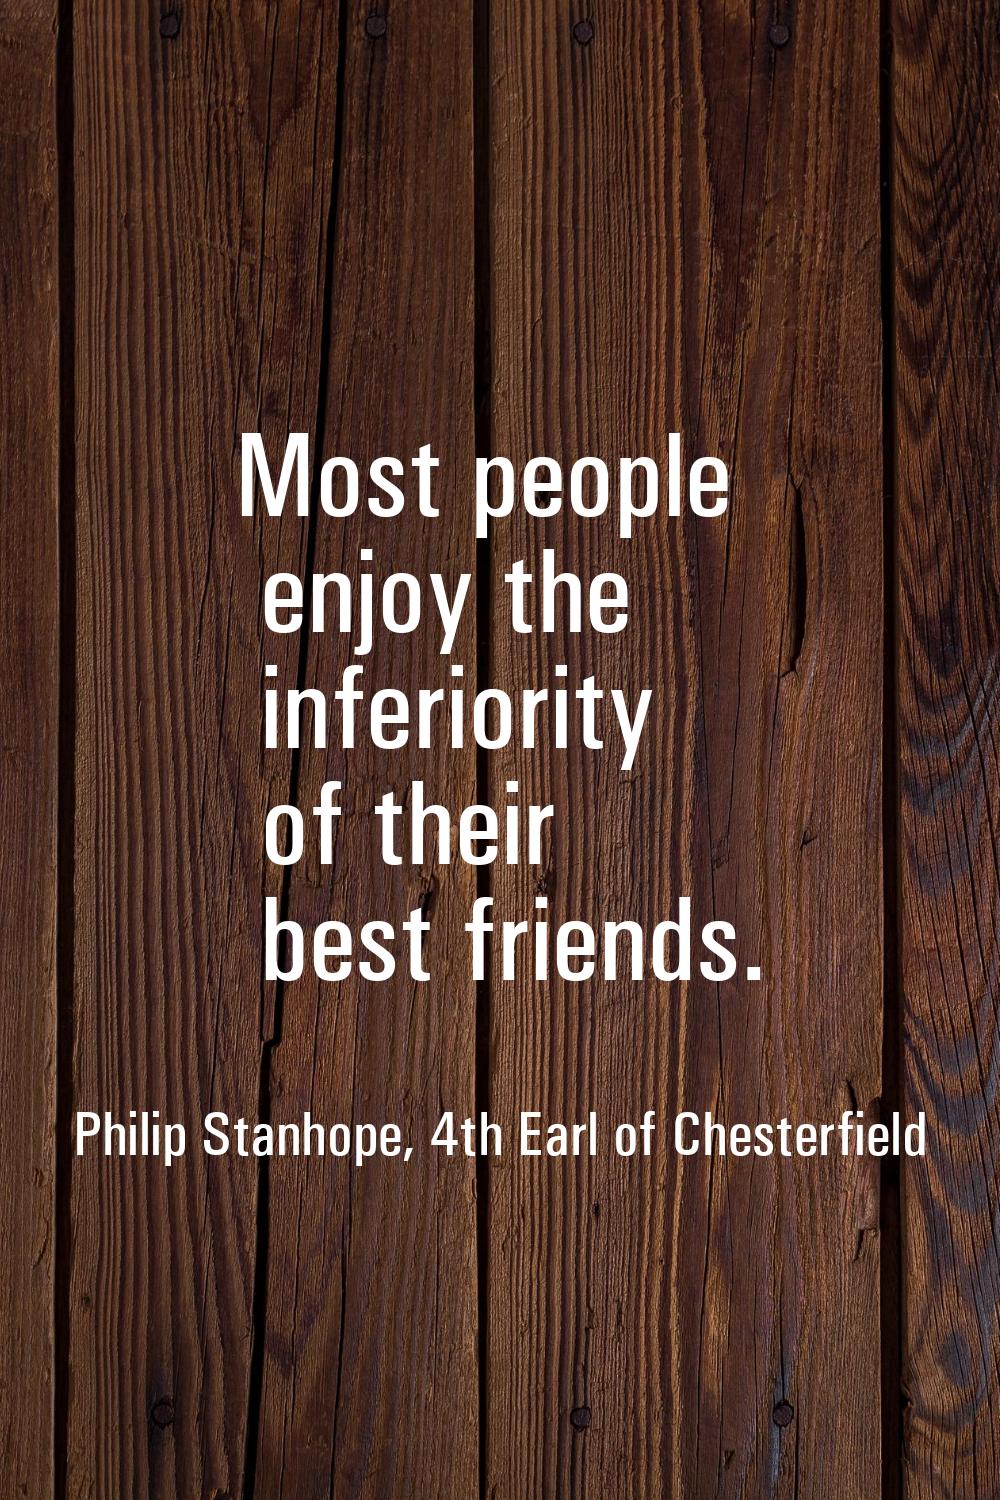 Most people enjoy the inferiority of their best friends.